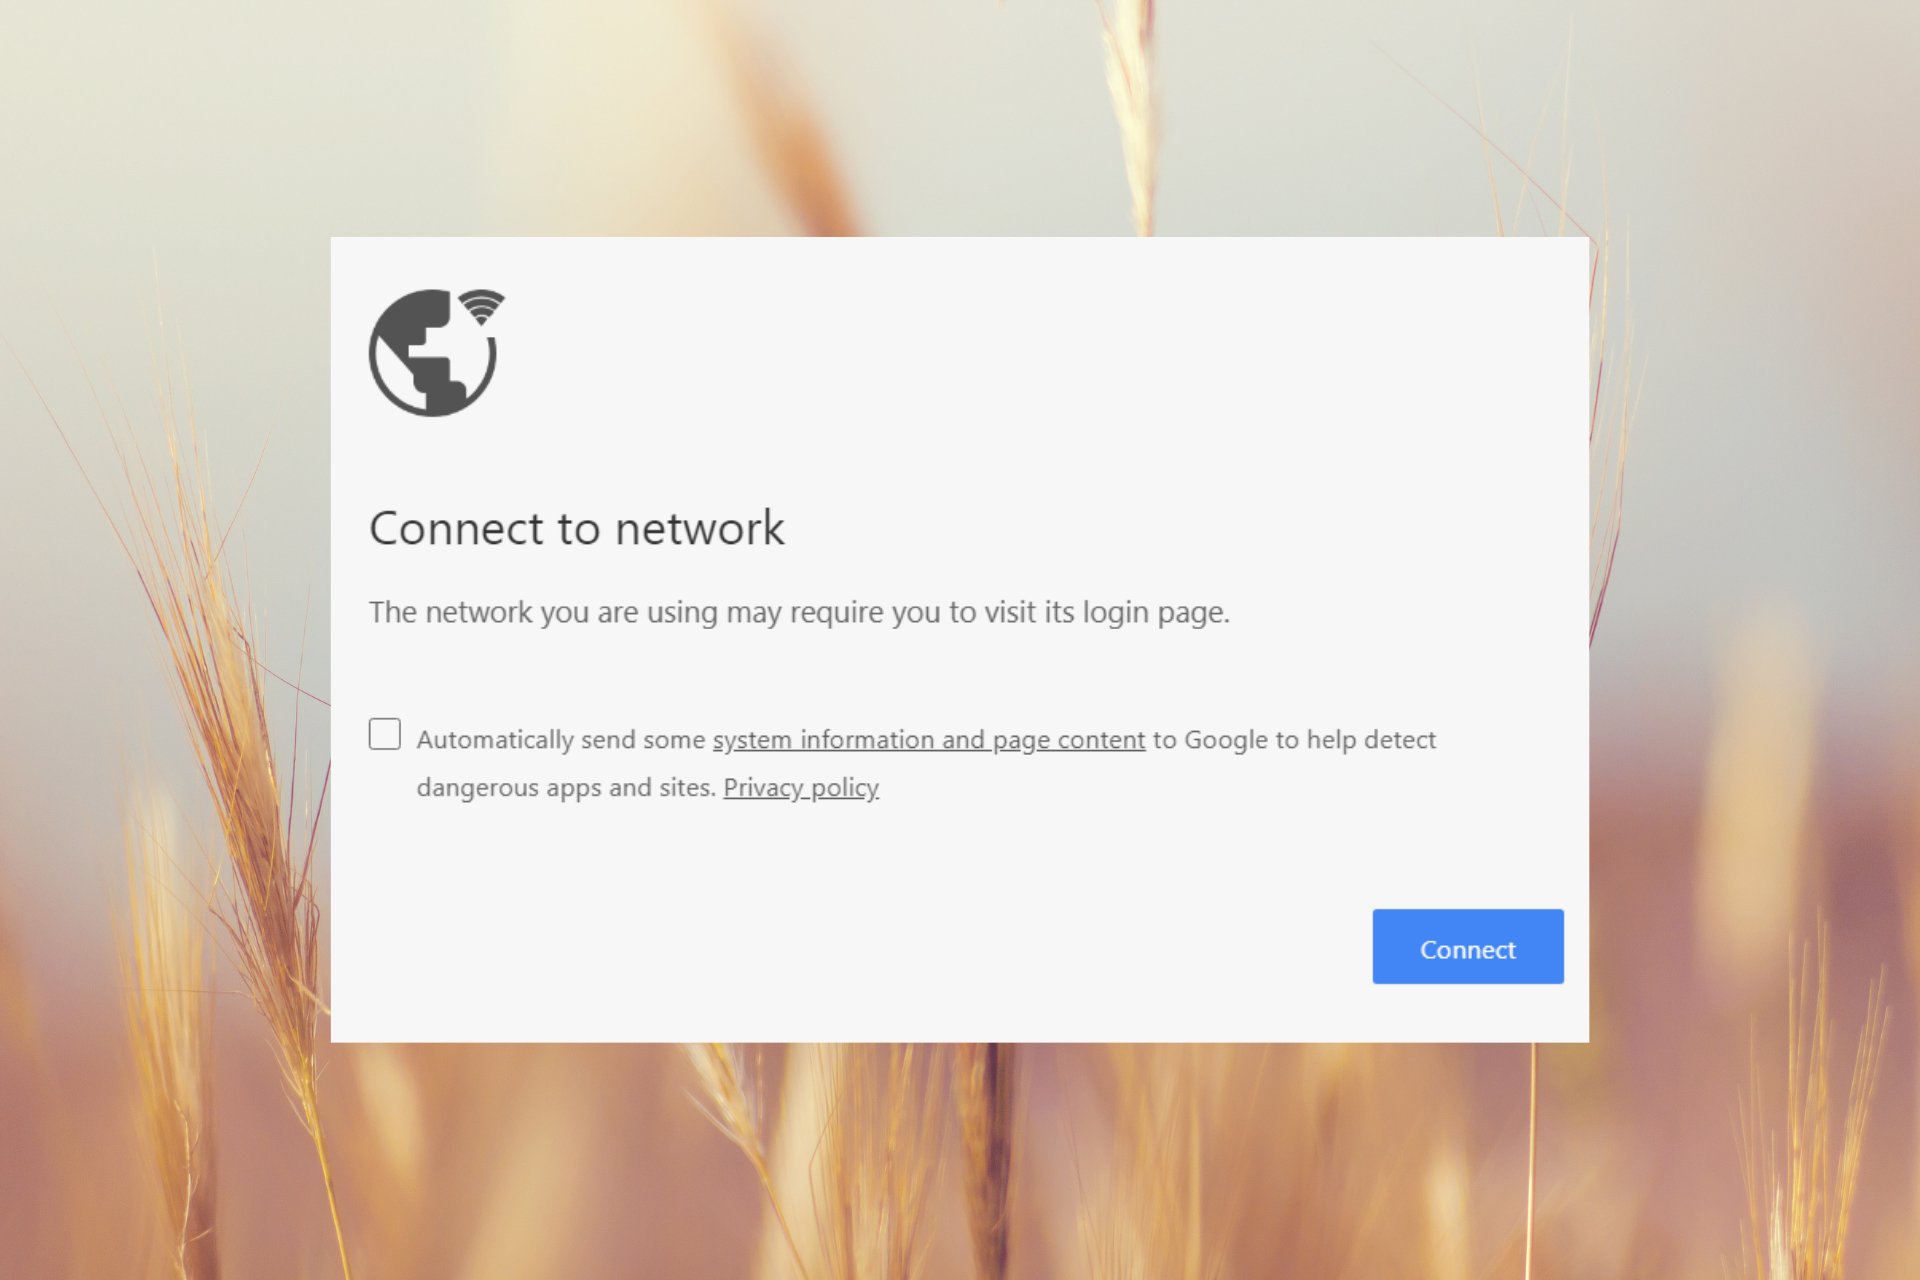 What to do if the network you are using may require you to visit its login page